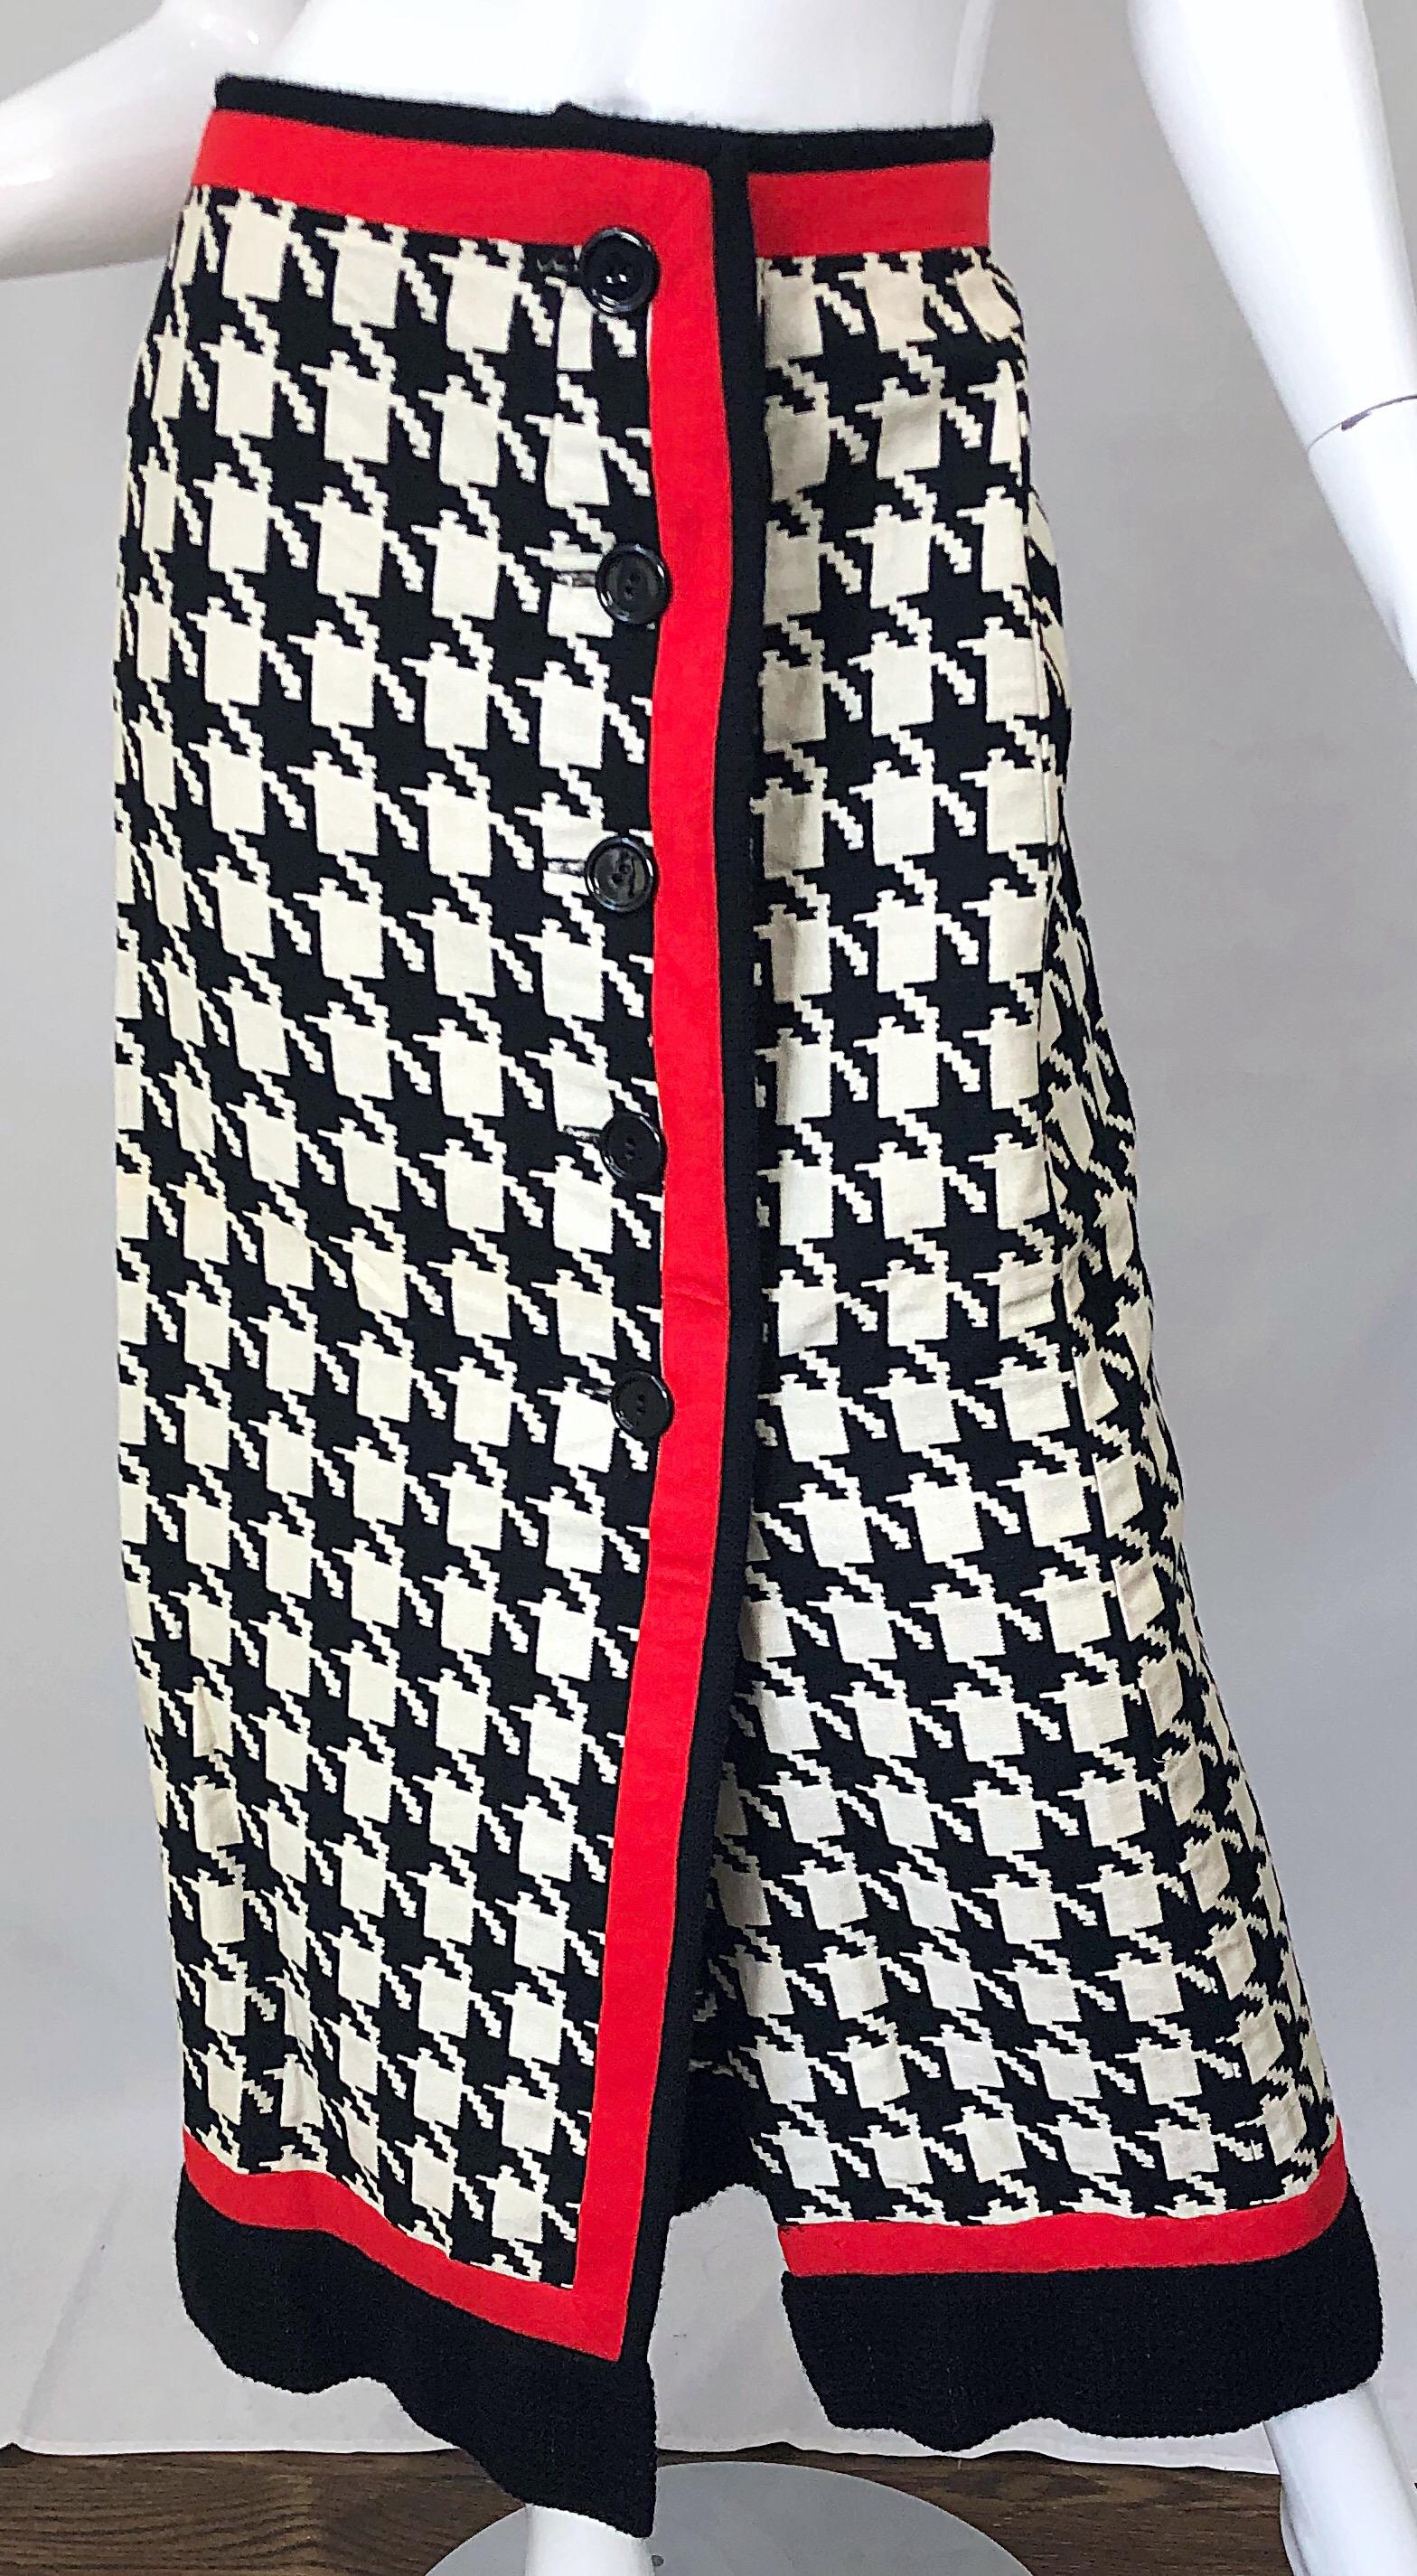 1970 Black and White and Red Houndstooth Striped Vintage 70s Maxi Skirt en vente 1